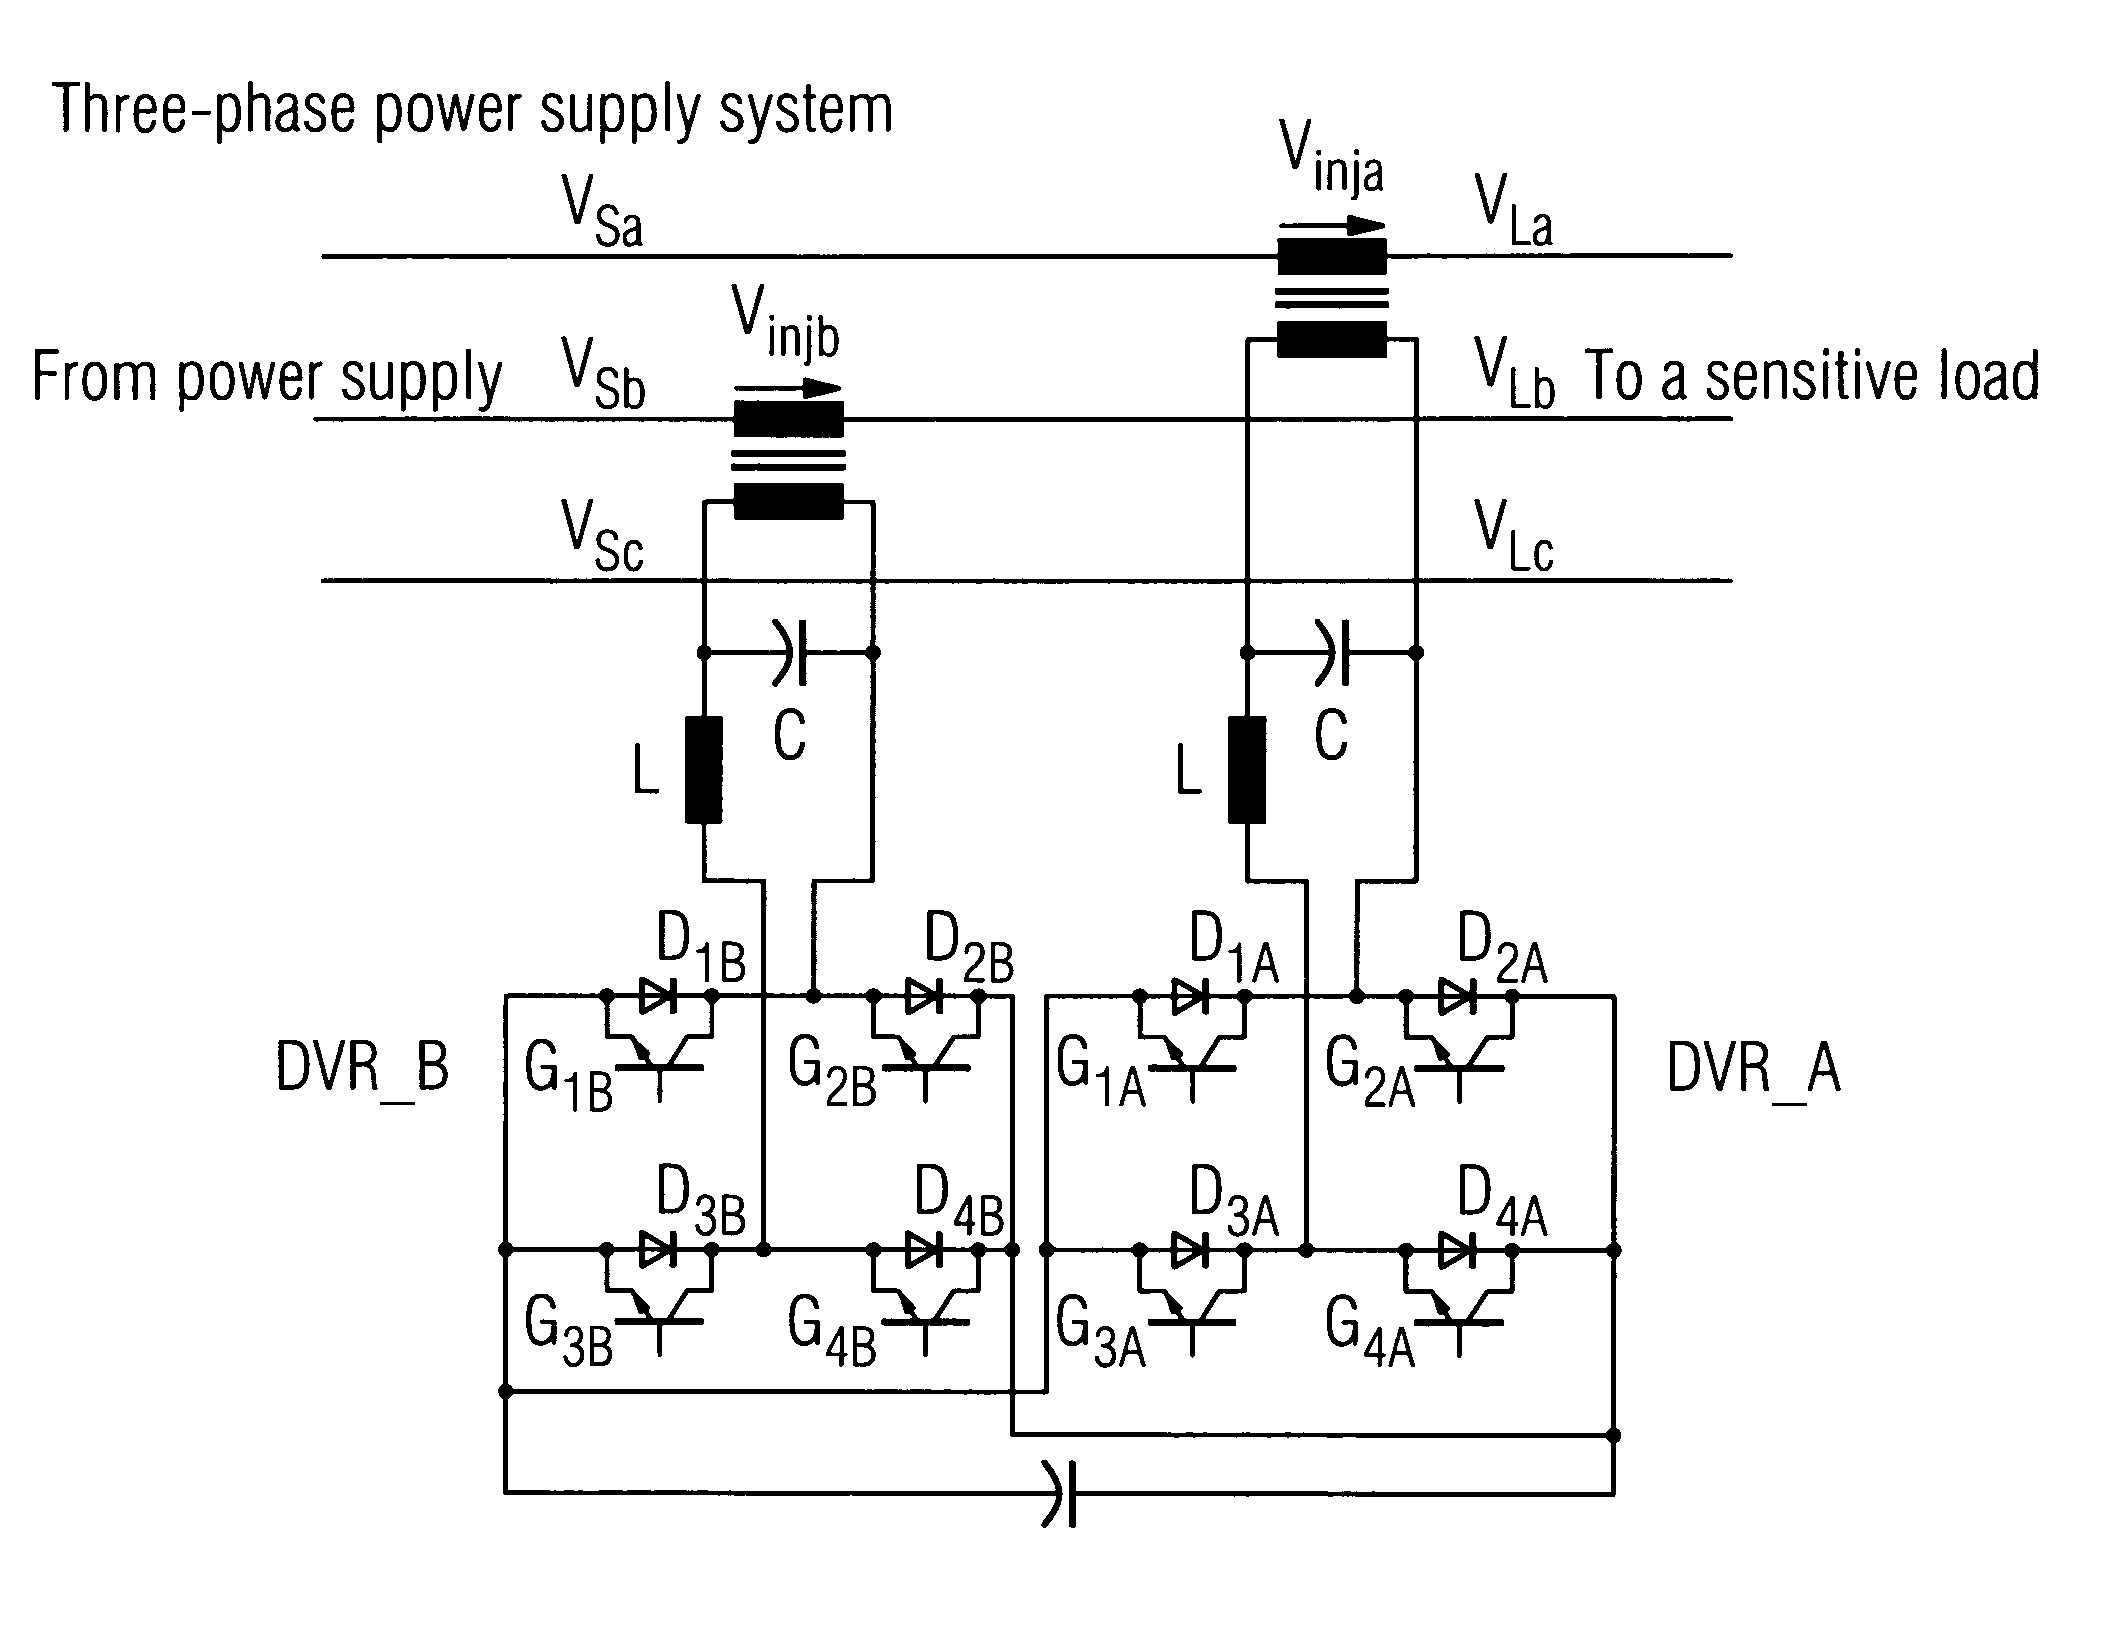 Dynamic voltage compensator used in three-phase power supply system